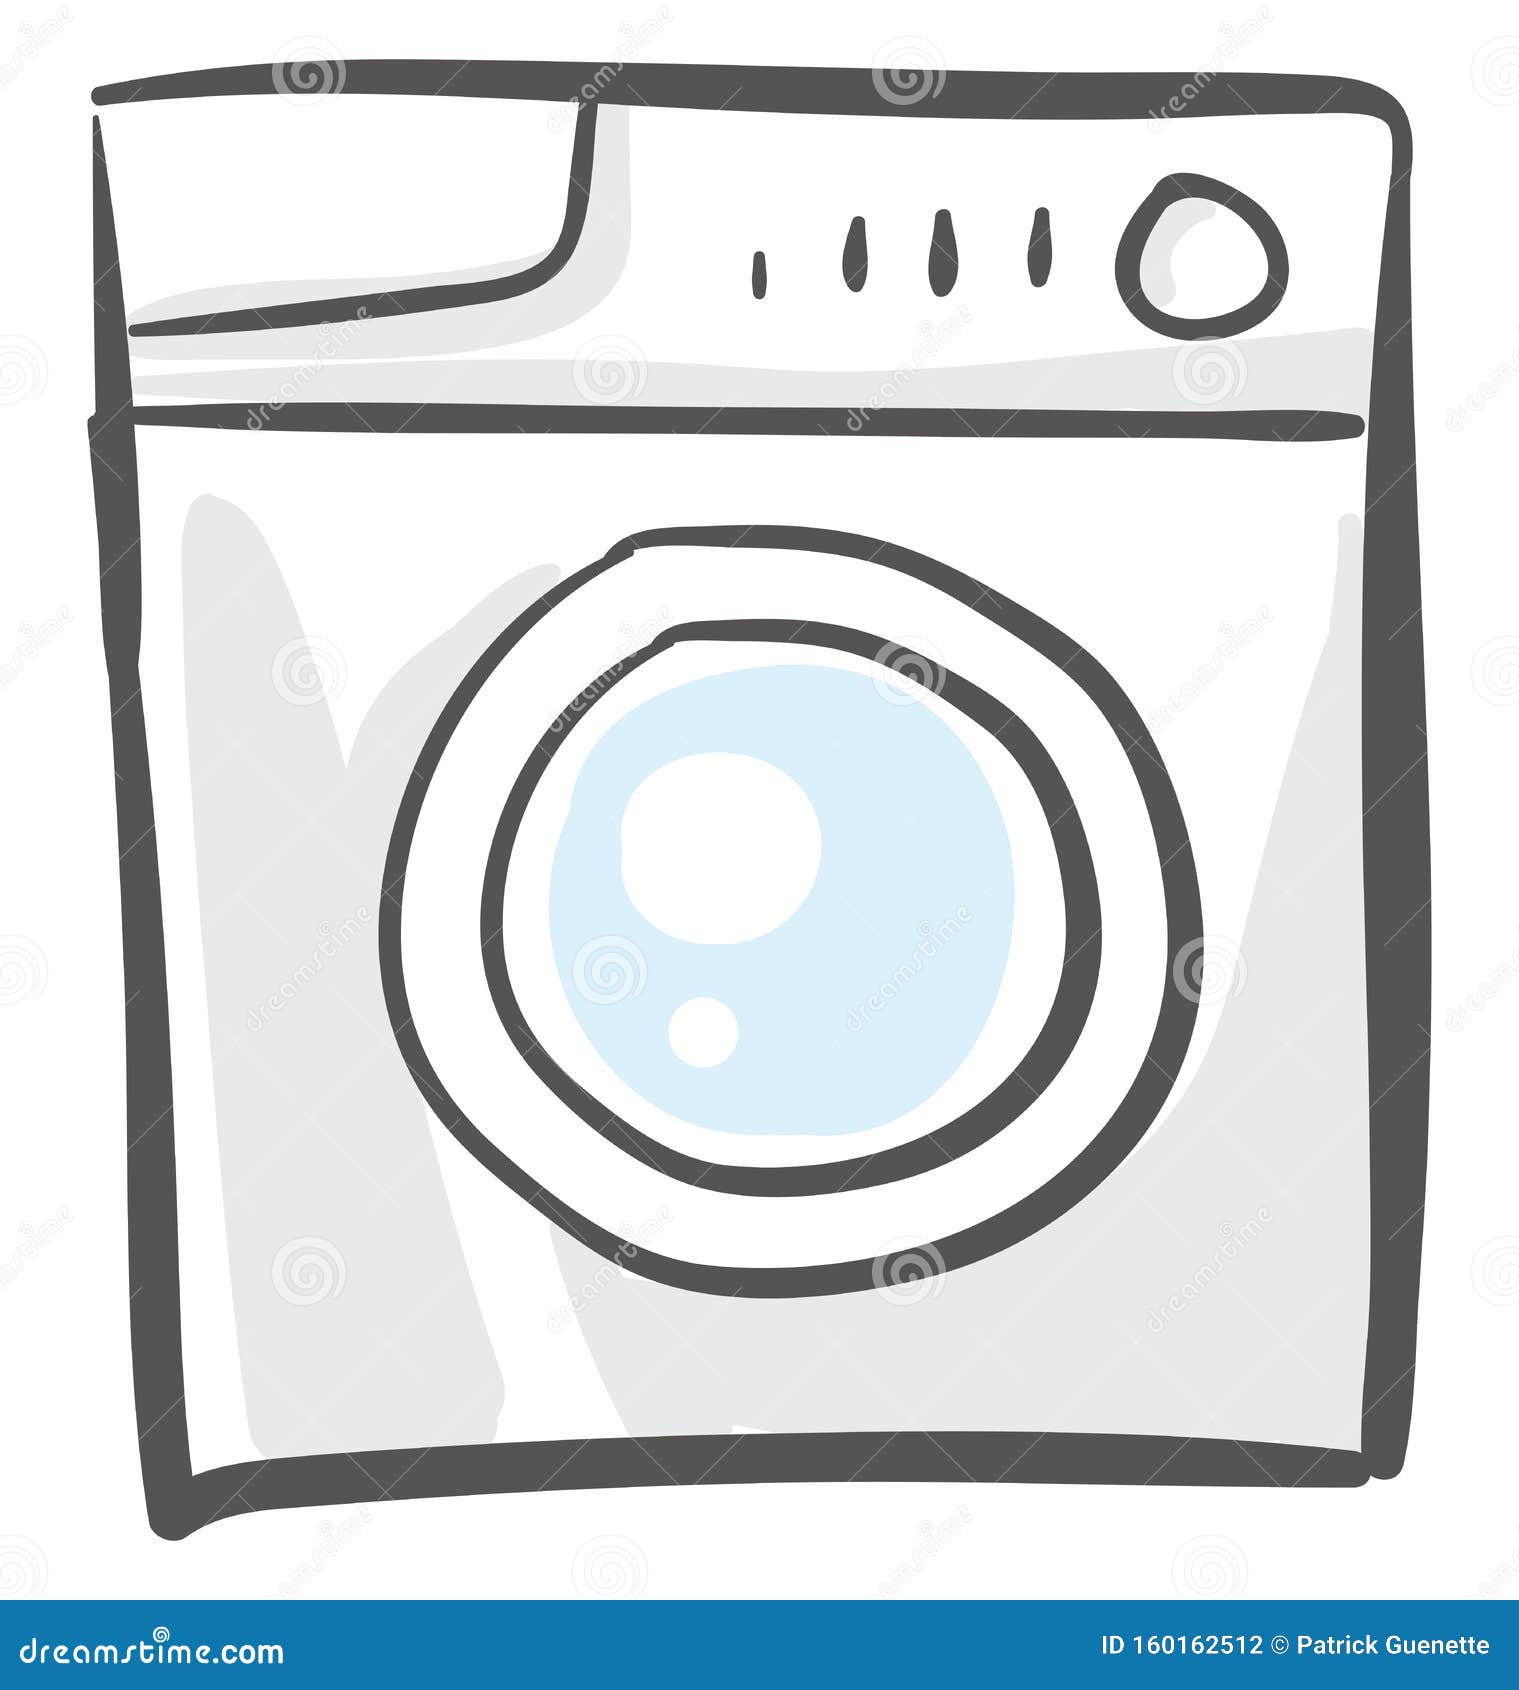 6350 Washing Machine Drawing Images Stock Photos  Vectors  Shutterstock